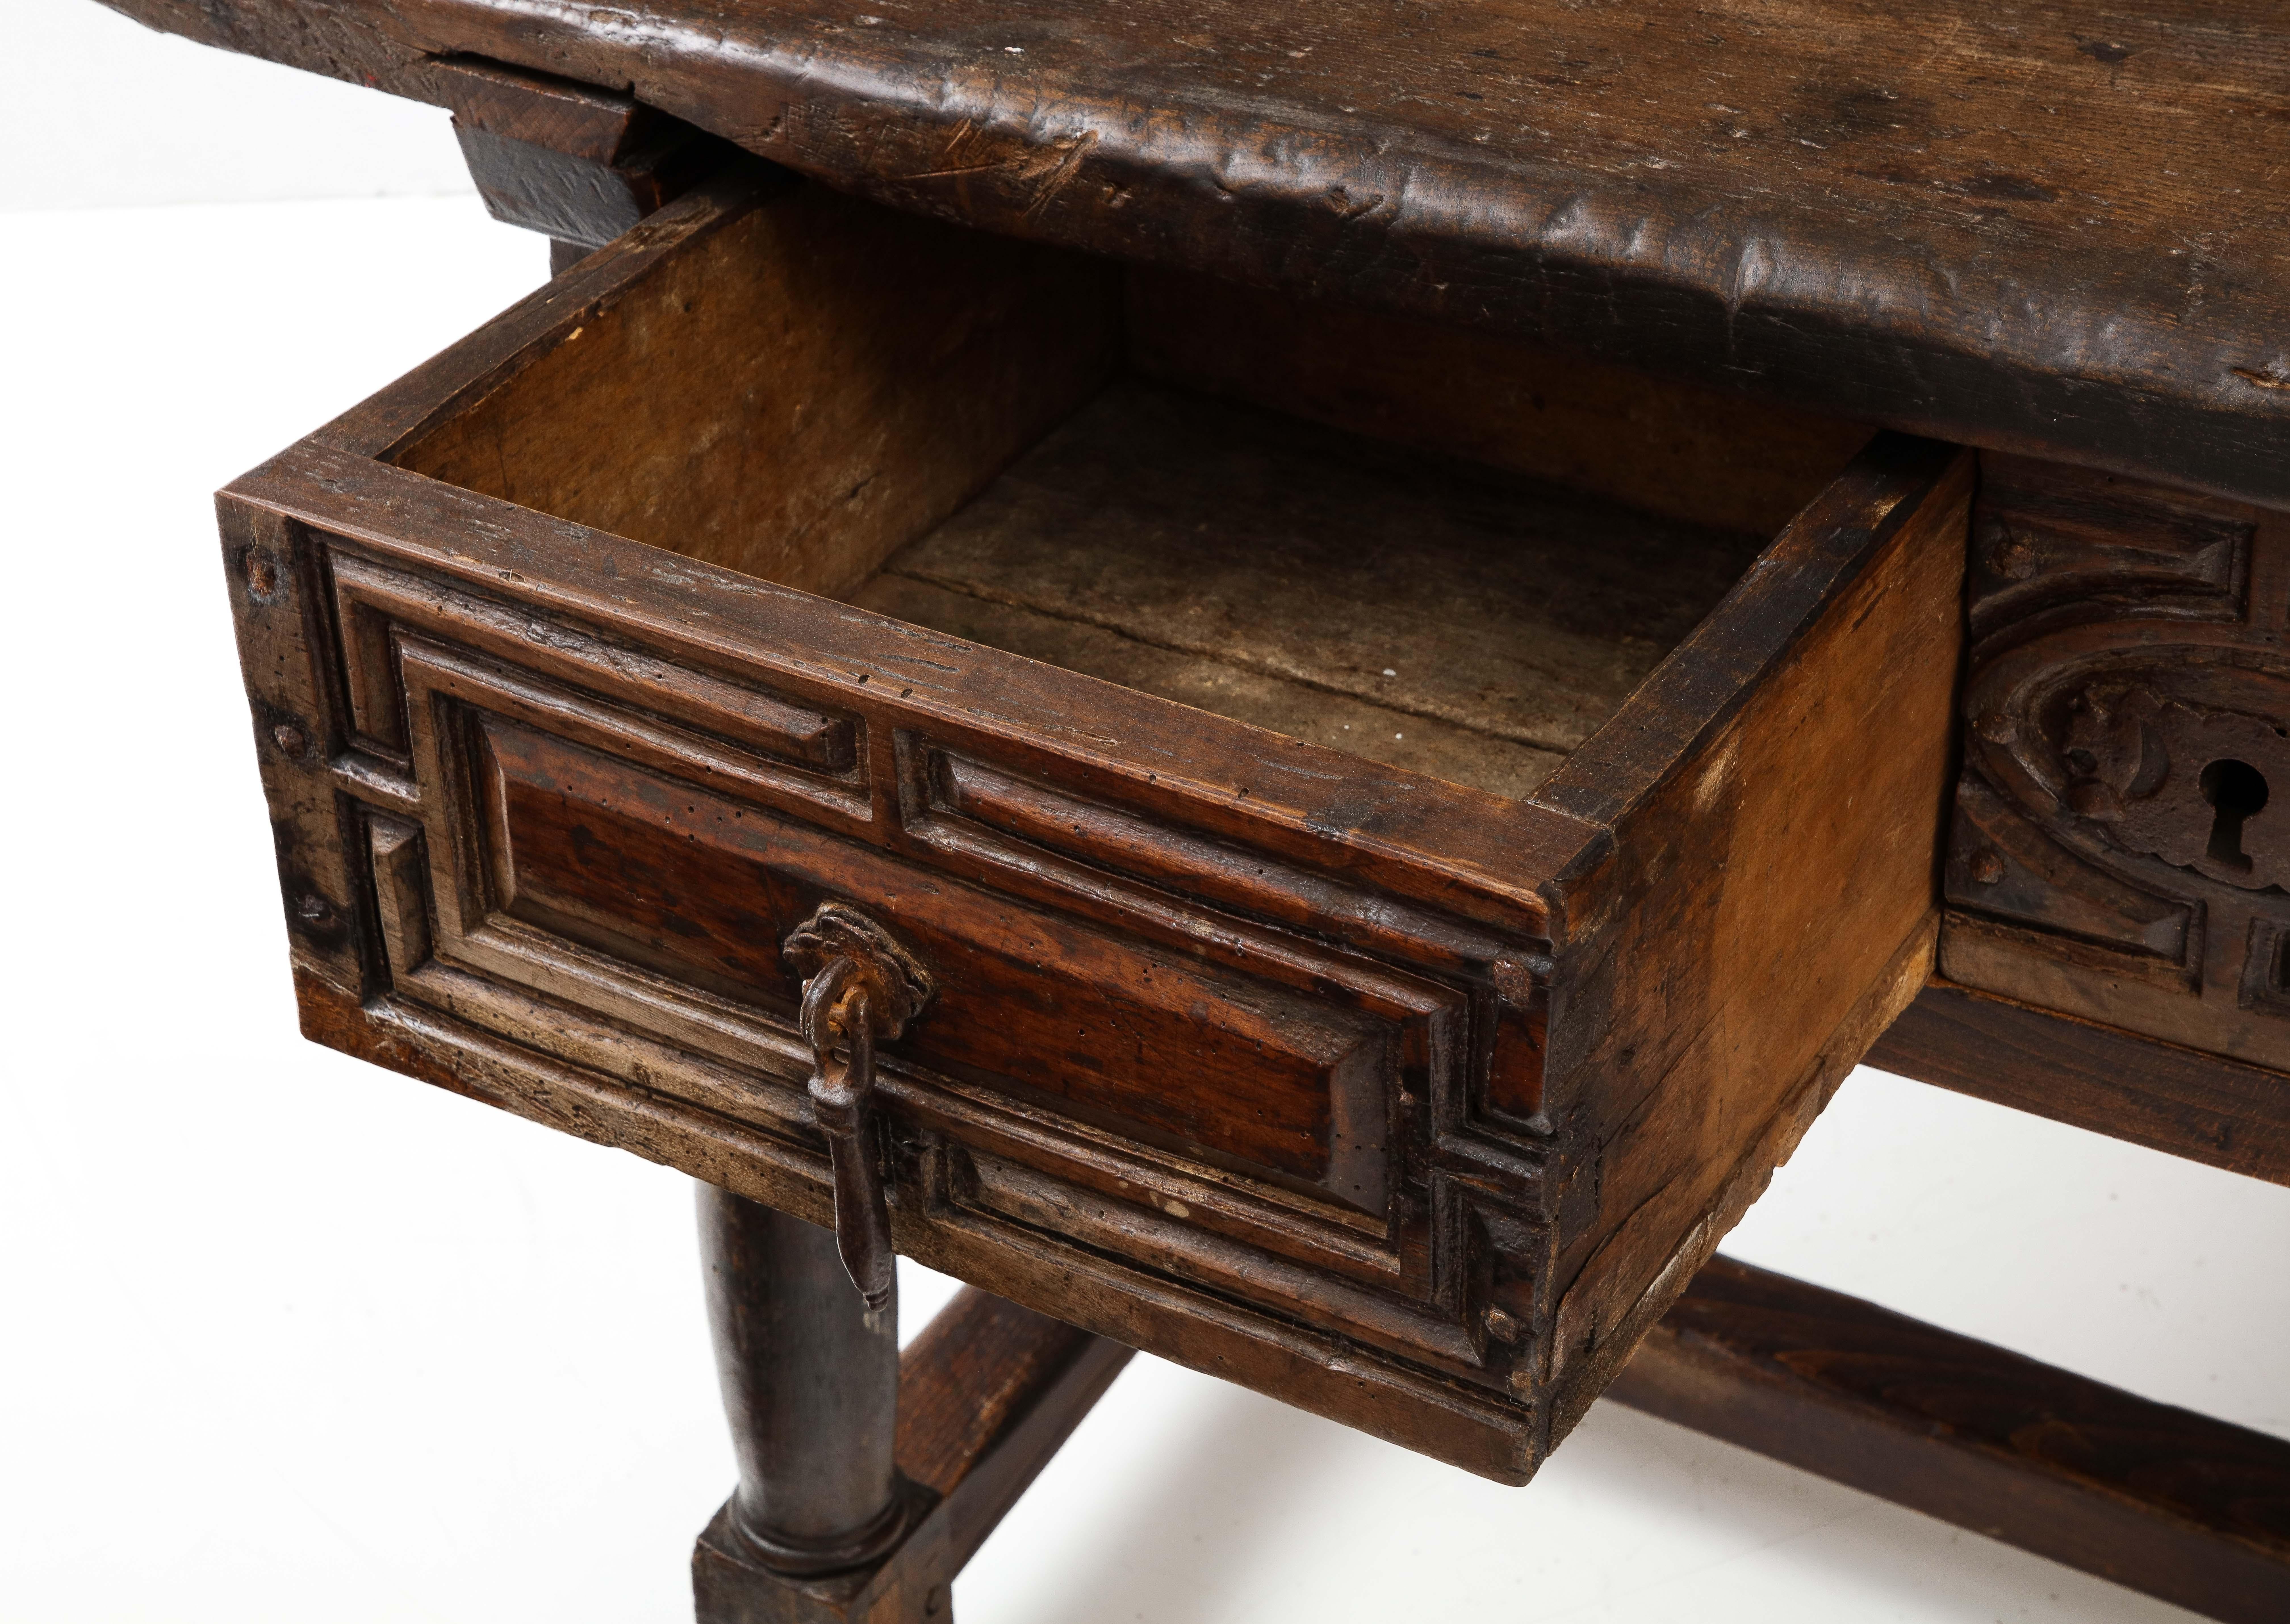 Late 16th C. Spanish Walnut Table with Iron Pulls & Drawers For Sale 4